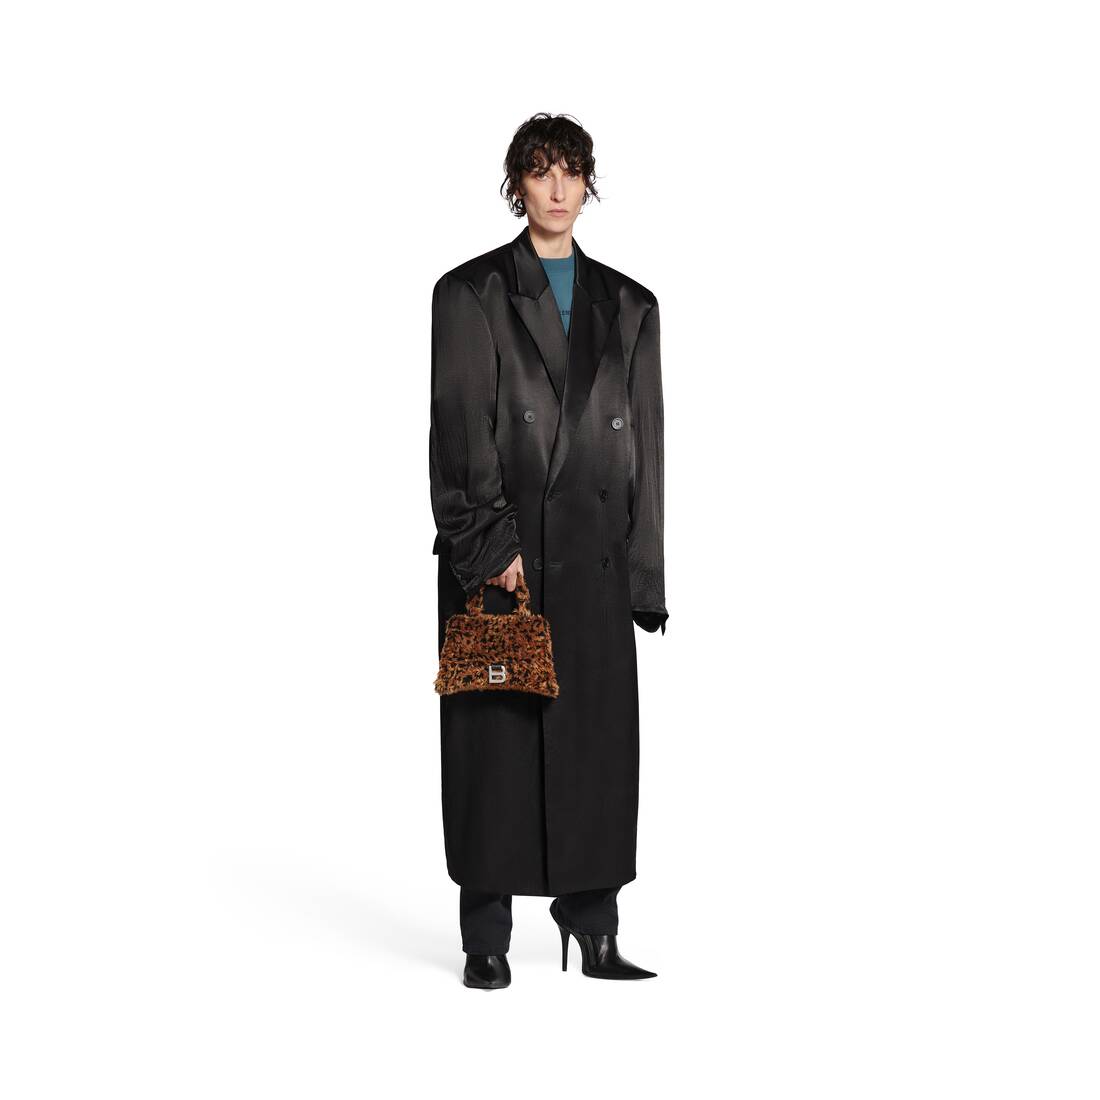 Pink Louis Vuitton Coat Clearance, SAVE 49% 